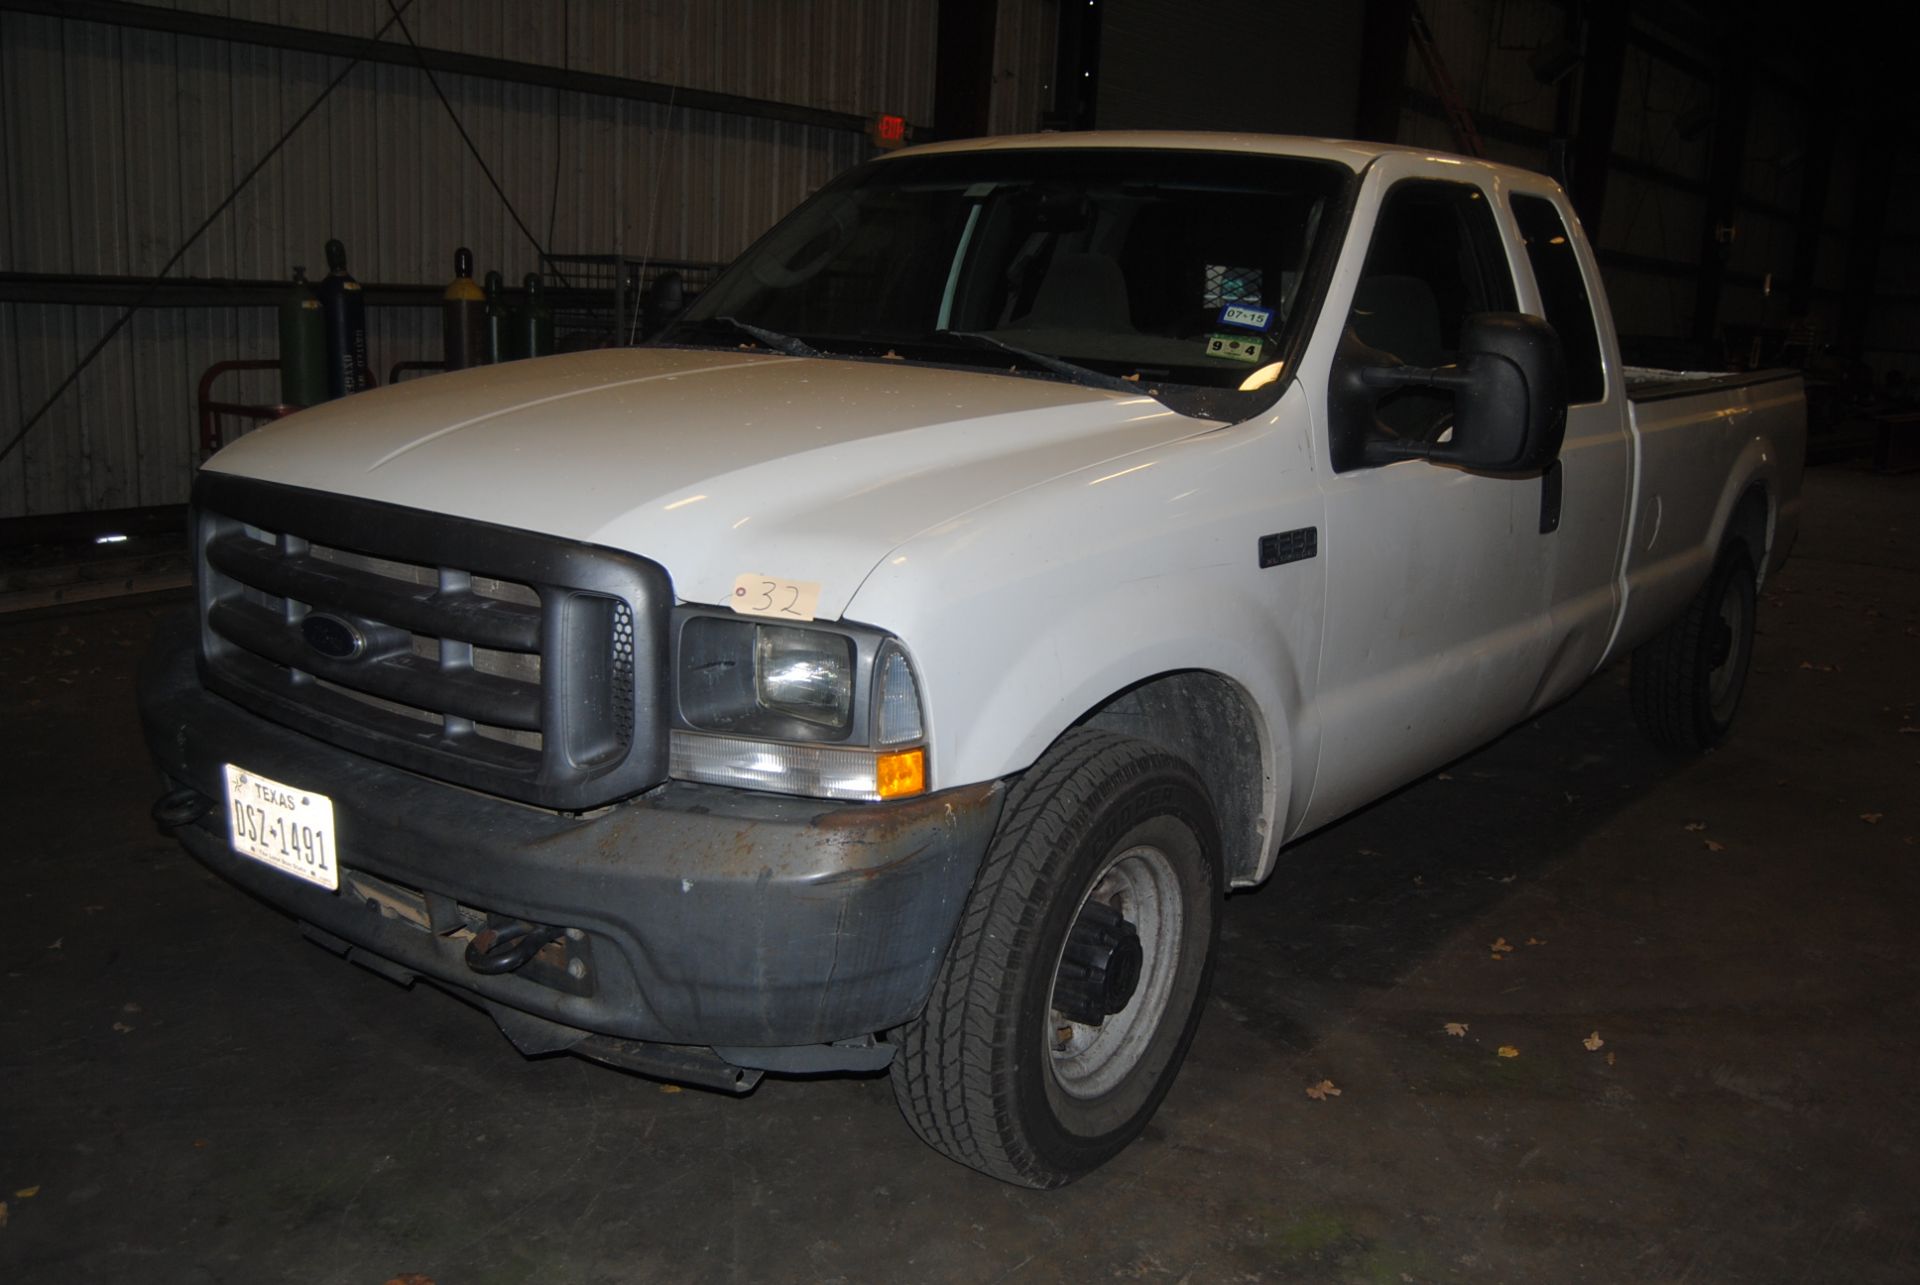 '04 Ford Work Truck F250 Super Duty - Image 4 of 11